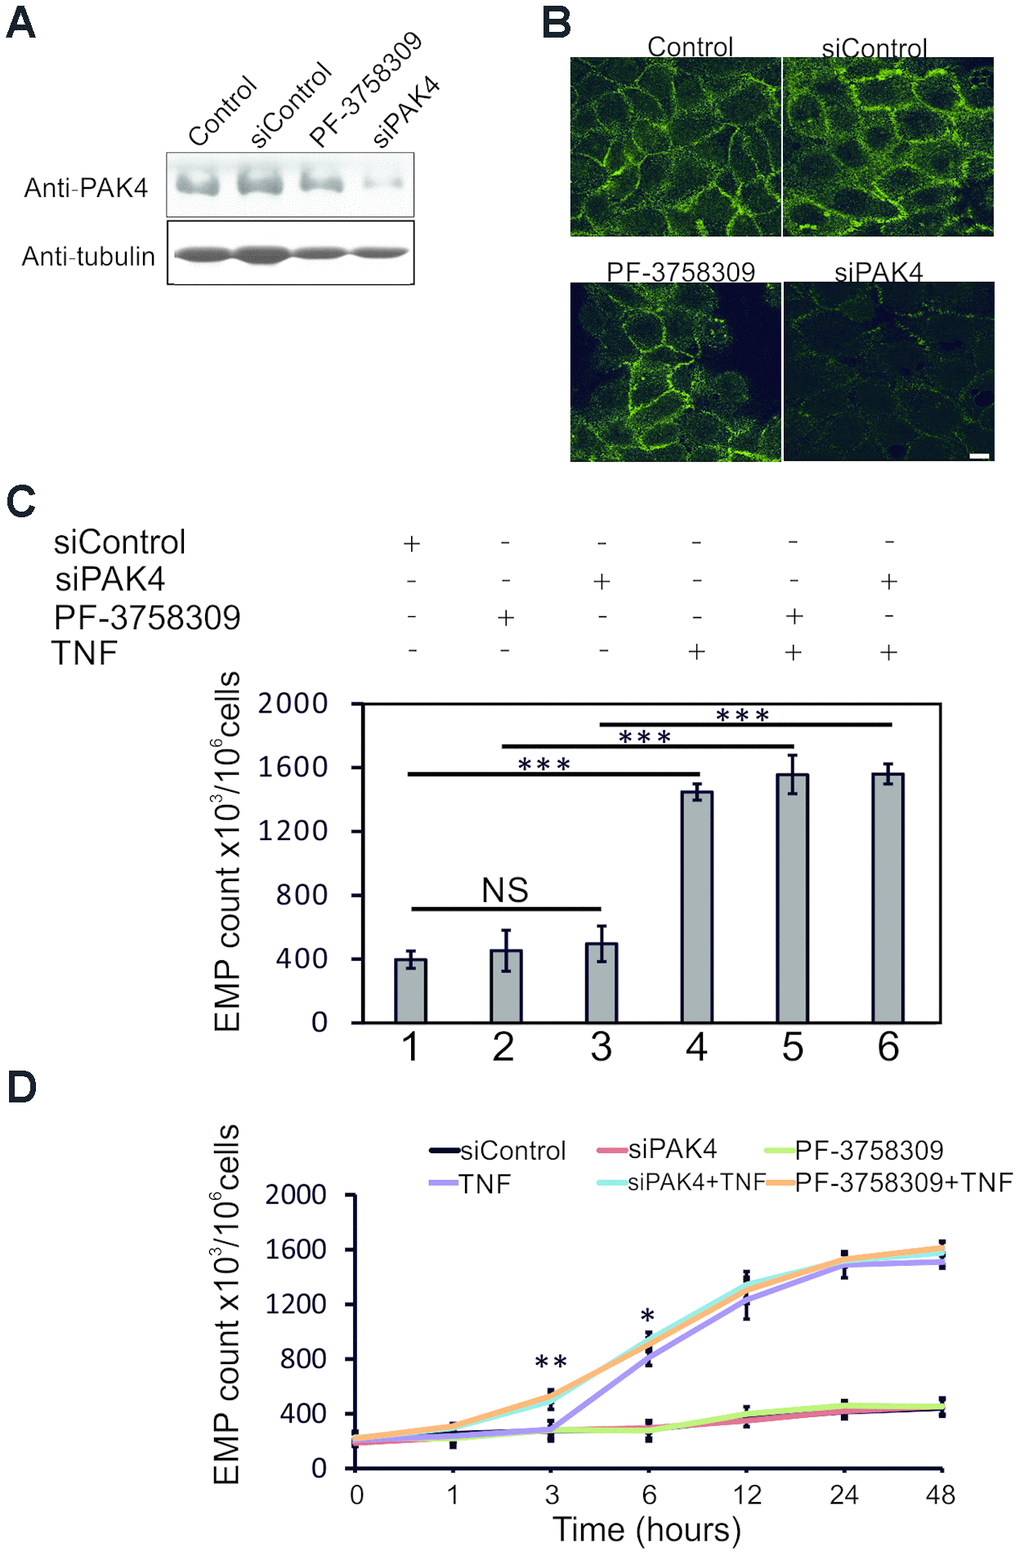 PAK4 inhibition sensitizes HUVECs to TNF-induced EMP release. (A) Western blotting of HUVECs transfected 48 h with PAK4 or control siRNAs, or treated 24 h with PAK4 inhibitor PF-3758309, and analyzed by PAK4 and control tubulin antibodies. (B) Immunofluorescence of HUVECs transfected with PAK4 or control siRNAs, or treated with PF-3758309, and stained by anti-PAK4 antibody; scale bar = 10 μm. (C) EMP release measured by FC in HUVECs transfected 48 h with PAK4 or control siRNAs, or treated 24 h with PF-3758309, and stimulated 24 h with TNF (100 ng/ml). (D) Time course of EMP release in TNF-treated HUVECs transfected 48 h with PAK4 or control siRNAs, or incubated 24 h with PF-3758309; * P